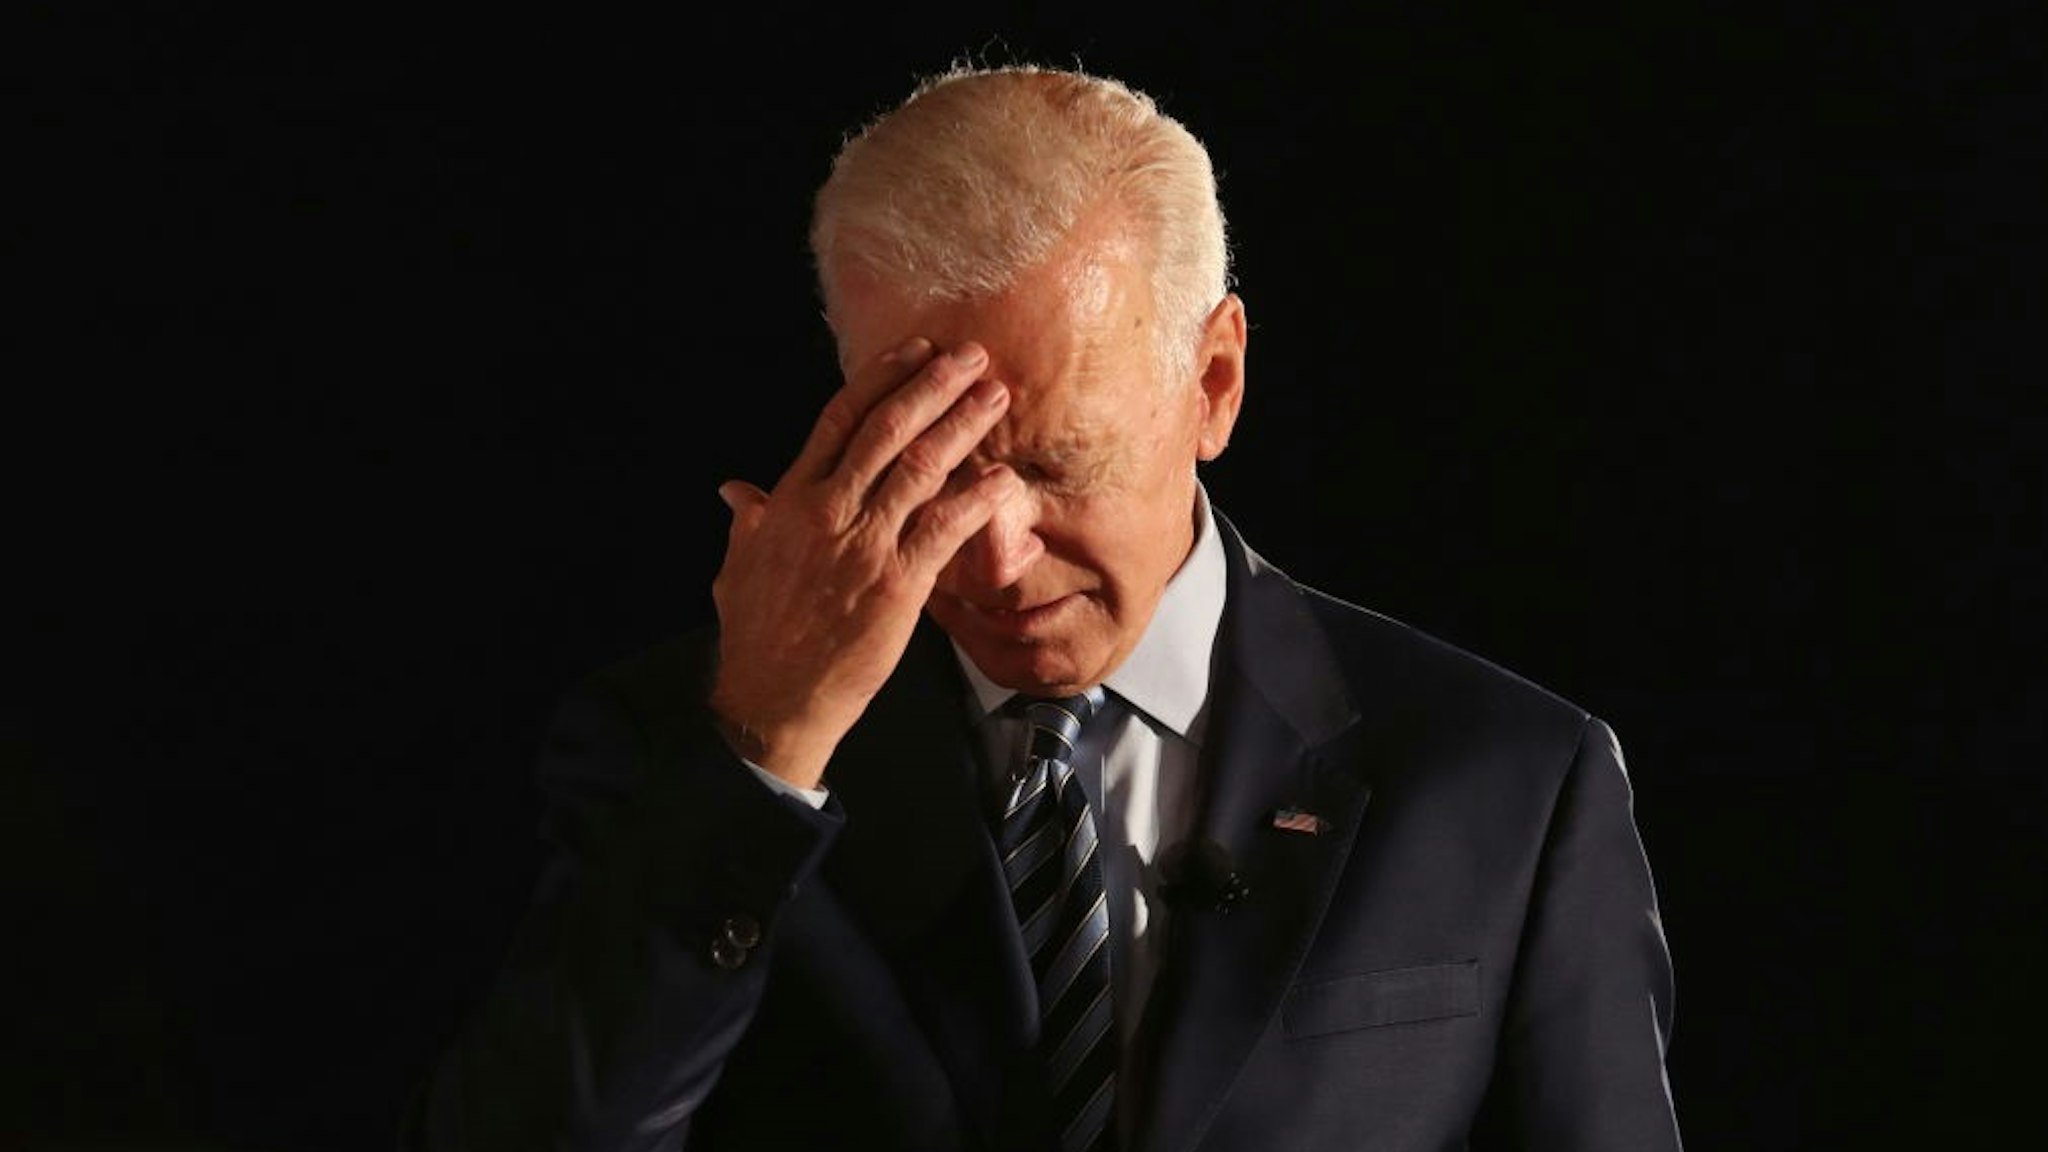 Democratic presidential candidate former U.S. Vice President Joe Biden pauses as he speaks during the AARP and The Des Moines Register Iowa Presidential Candidate Forum at Drake University on July 15, 2019 in Des Moines, Iowa. Twenty Democratic presidential candidates are participating in the forums that will feature four candidate per forum, to be held in cities across Iowa over five days. (Photo by